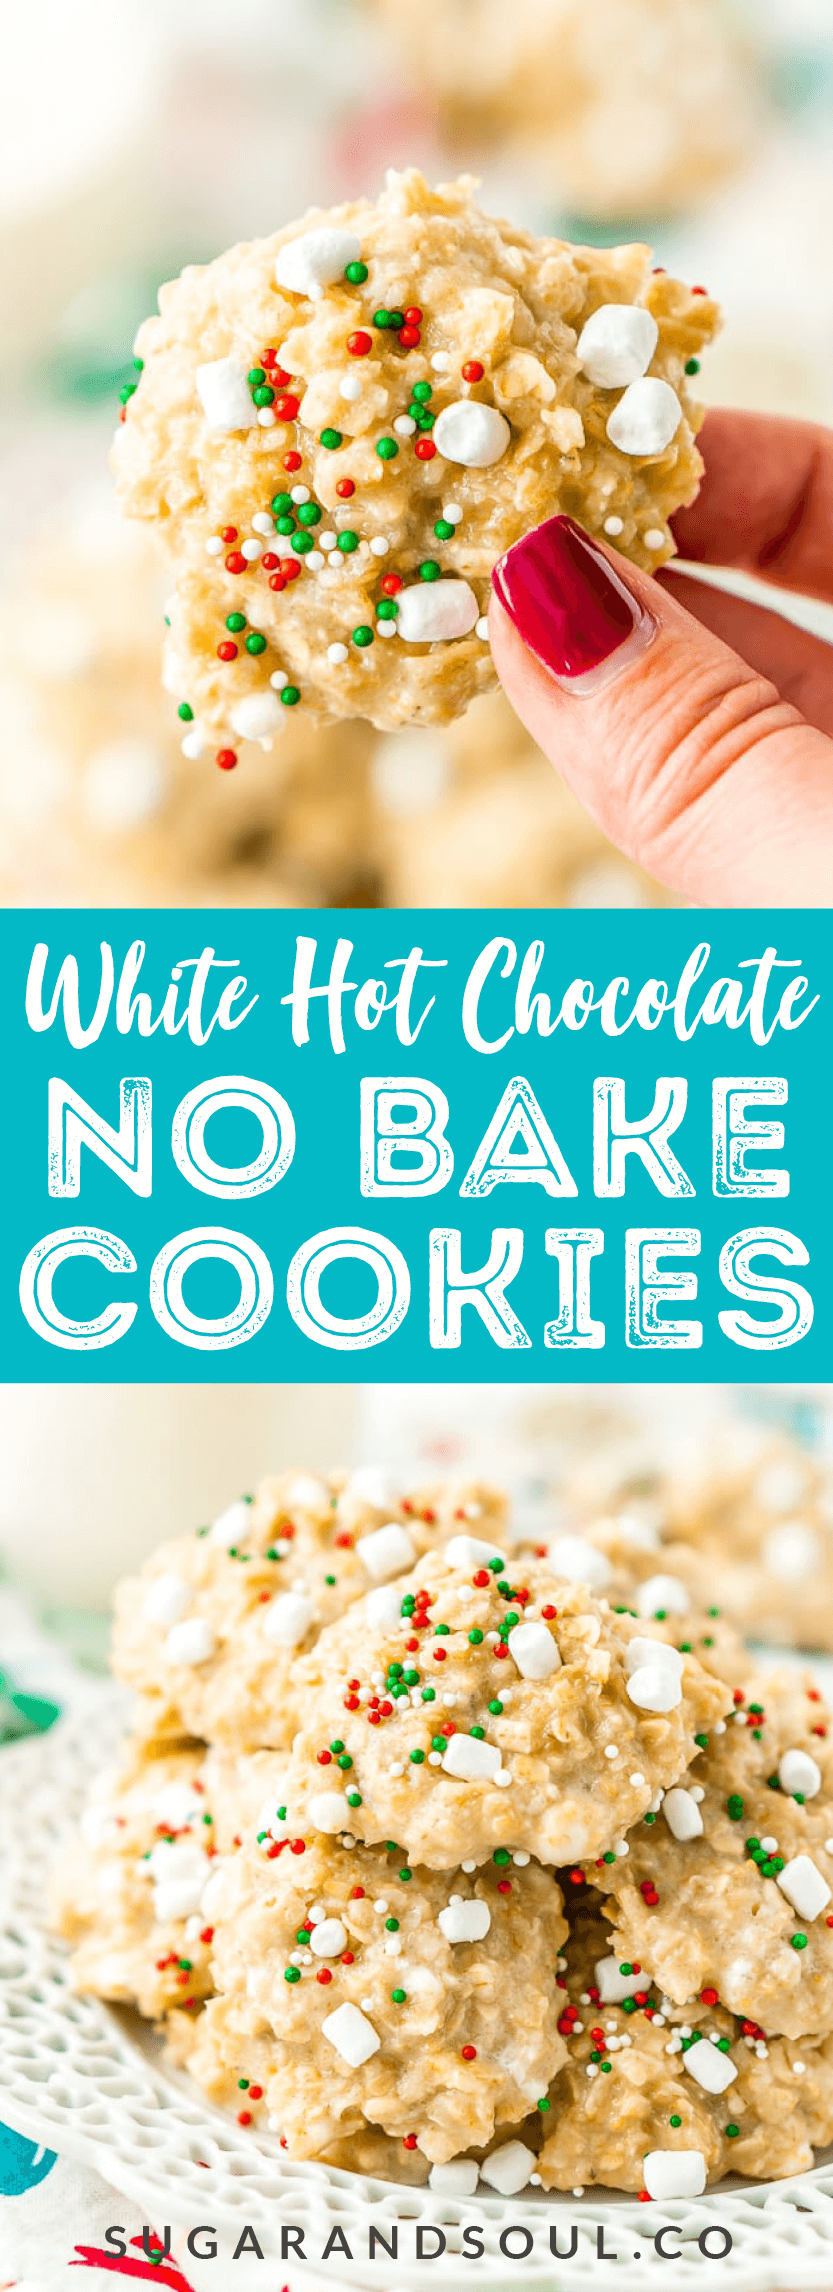 These White Hot Chocolate No Bake Cookies are so simple to make with butter, oatmeal, marshmallows, pudding, hot chocolate mix and more! They’re nut and gluten free and Santa is sure to gobble them up!

 via @sugarandsoulco